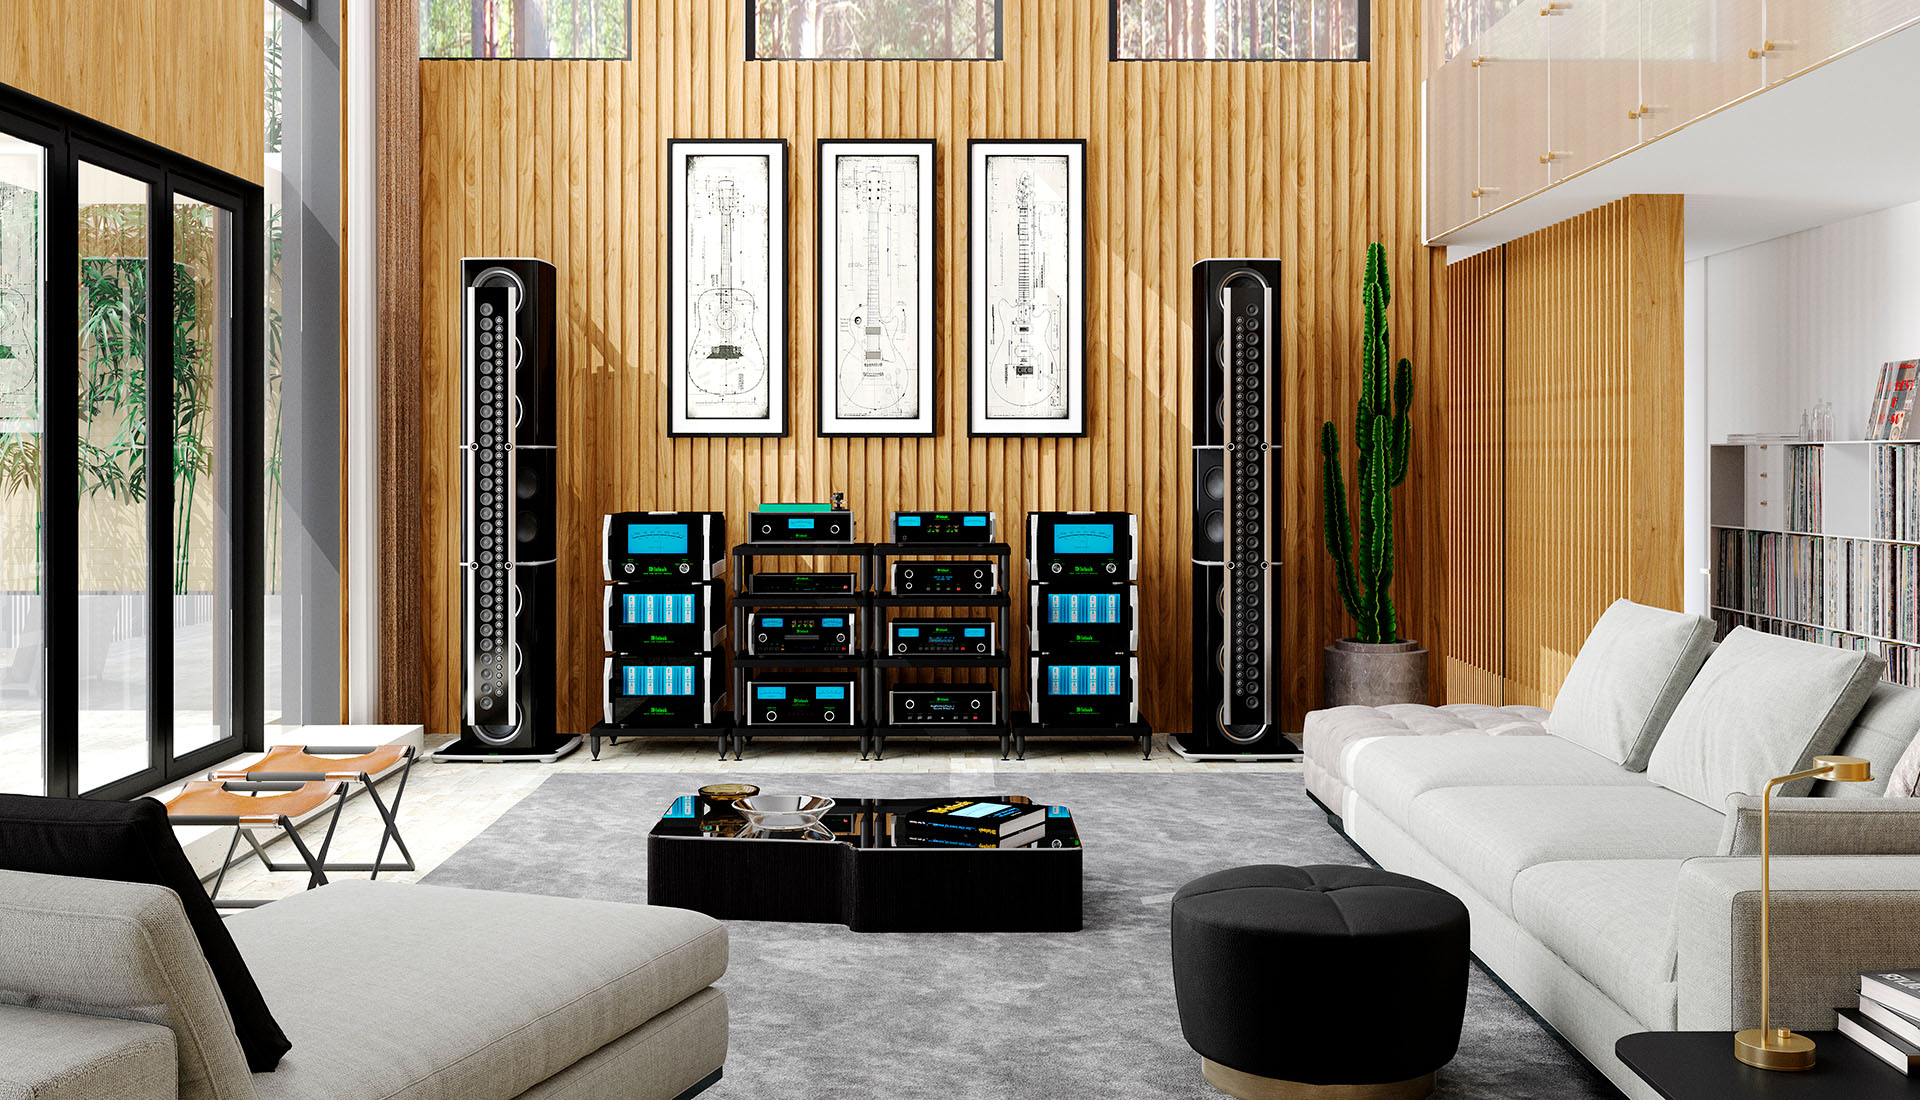 McIntosh Reference home audio music system